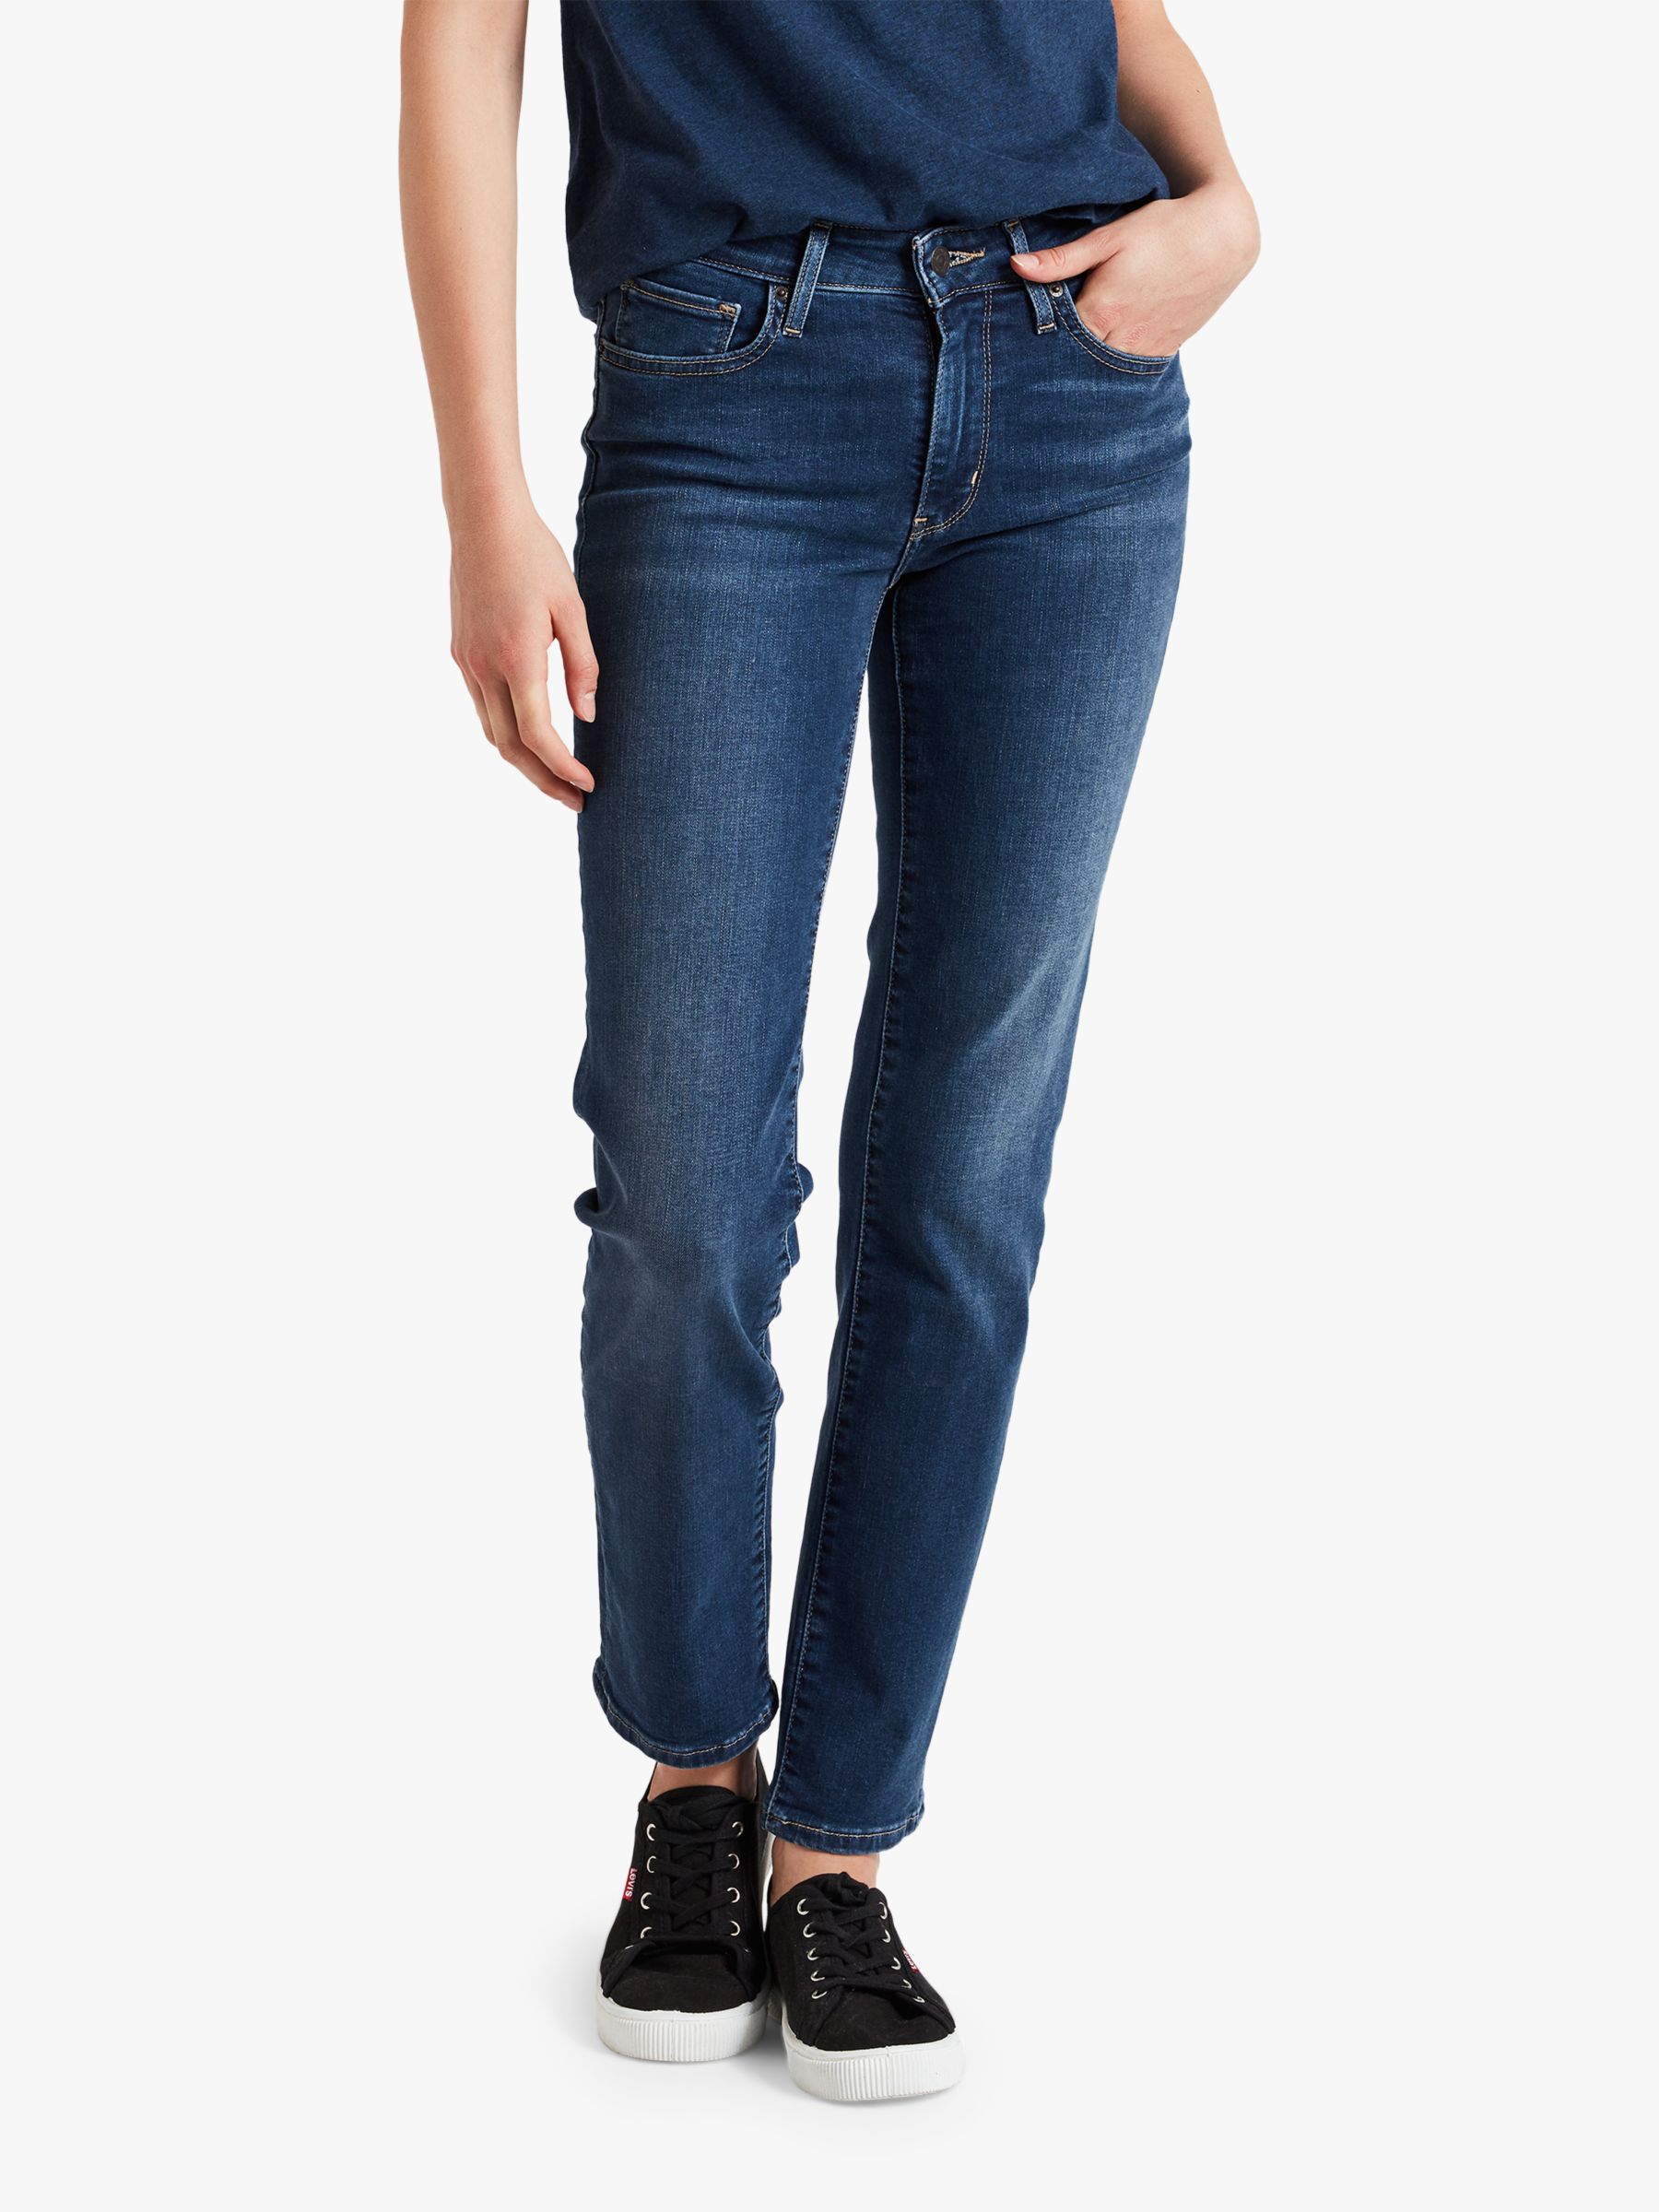 Levi's 712 Slim Mid Rise Top Sellers, SAVE 30% 